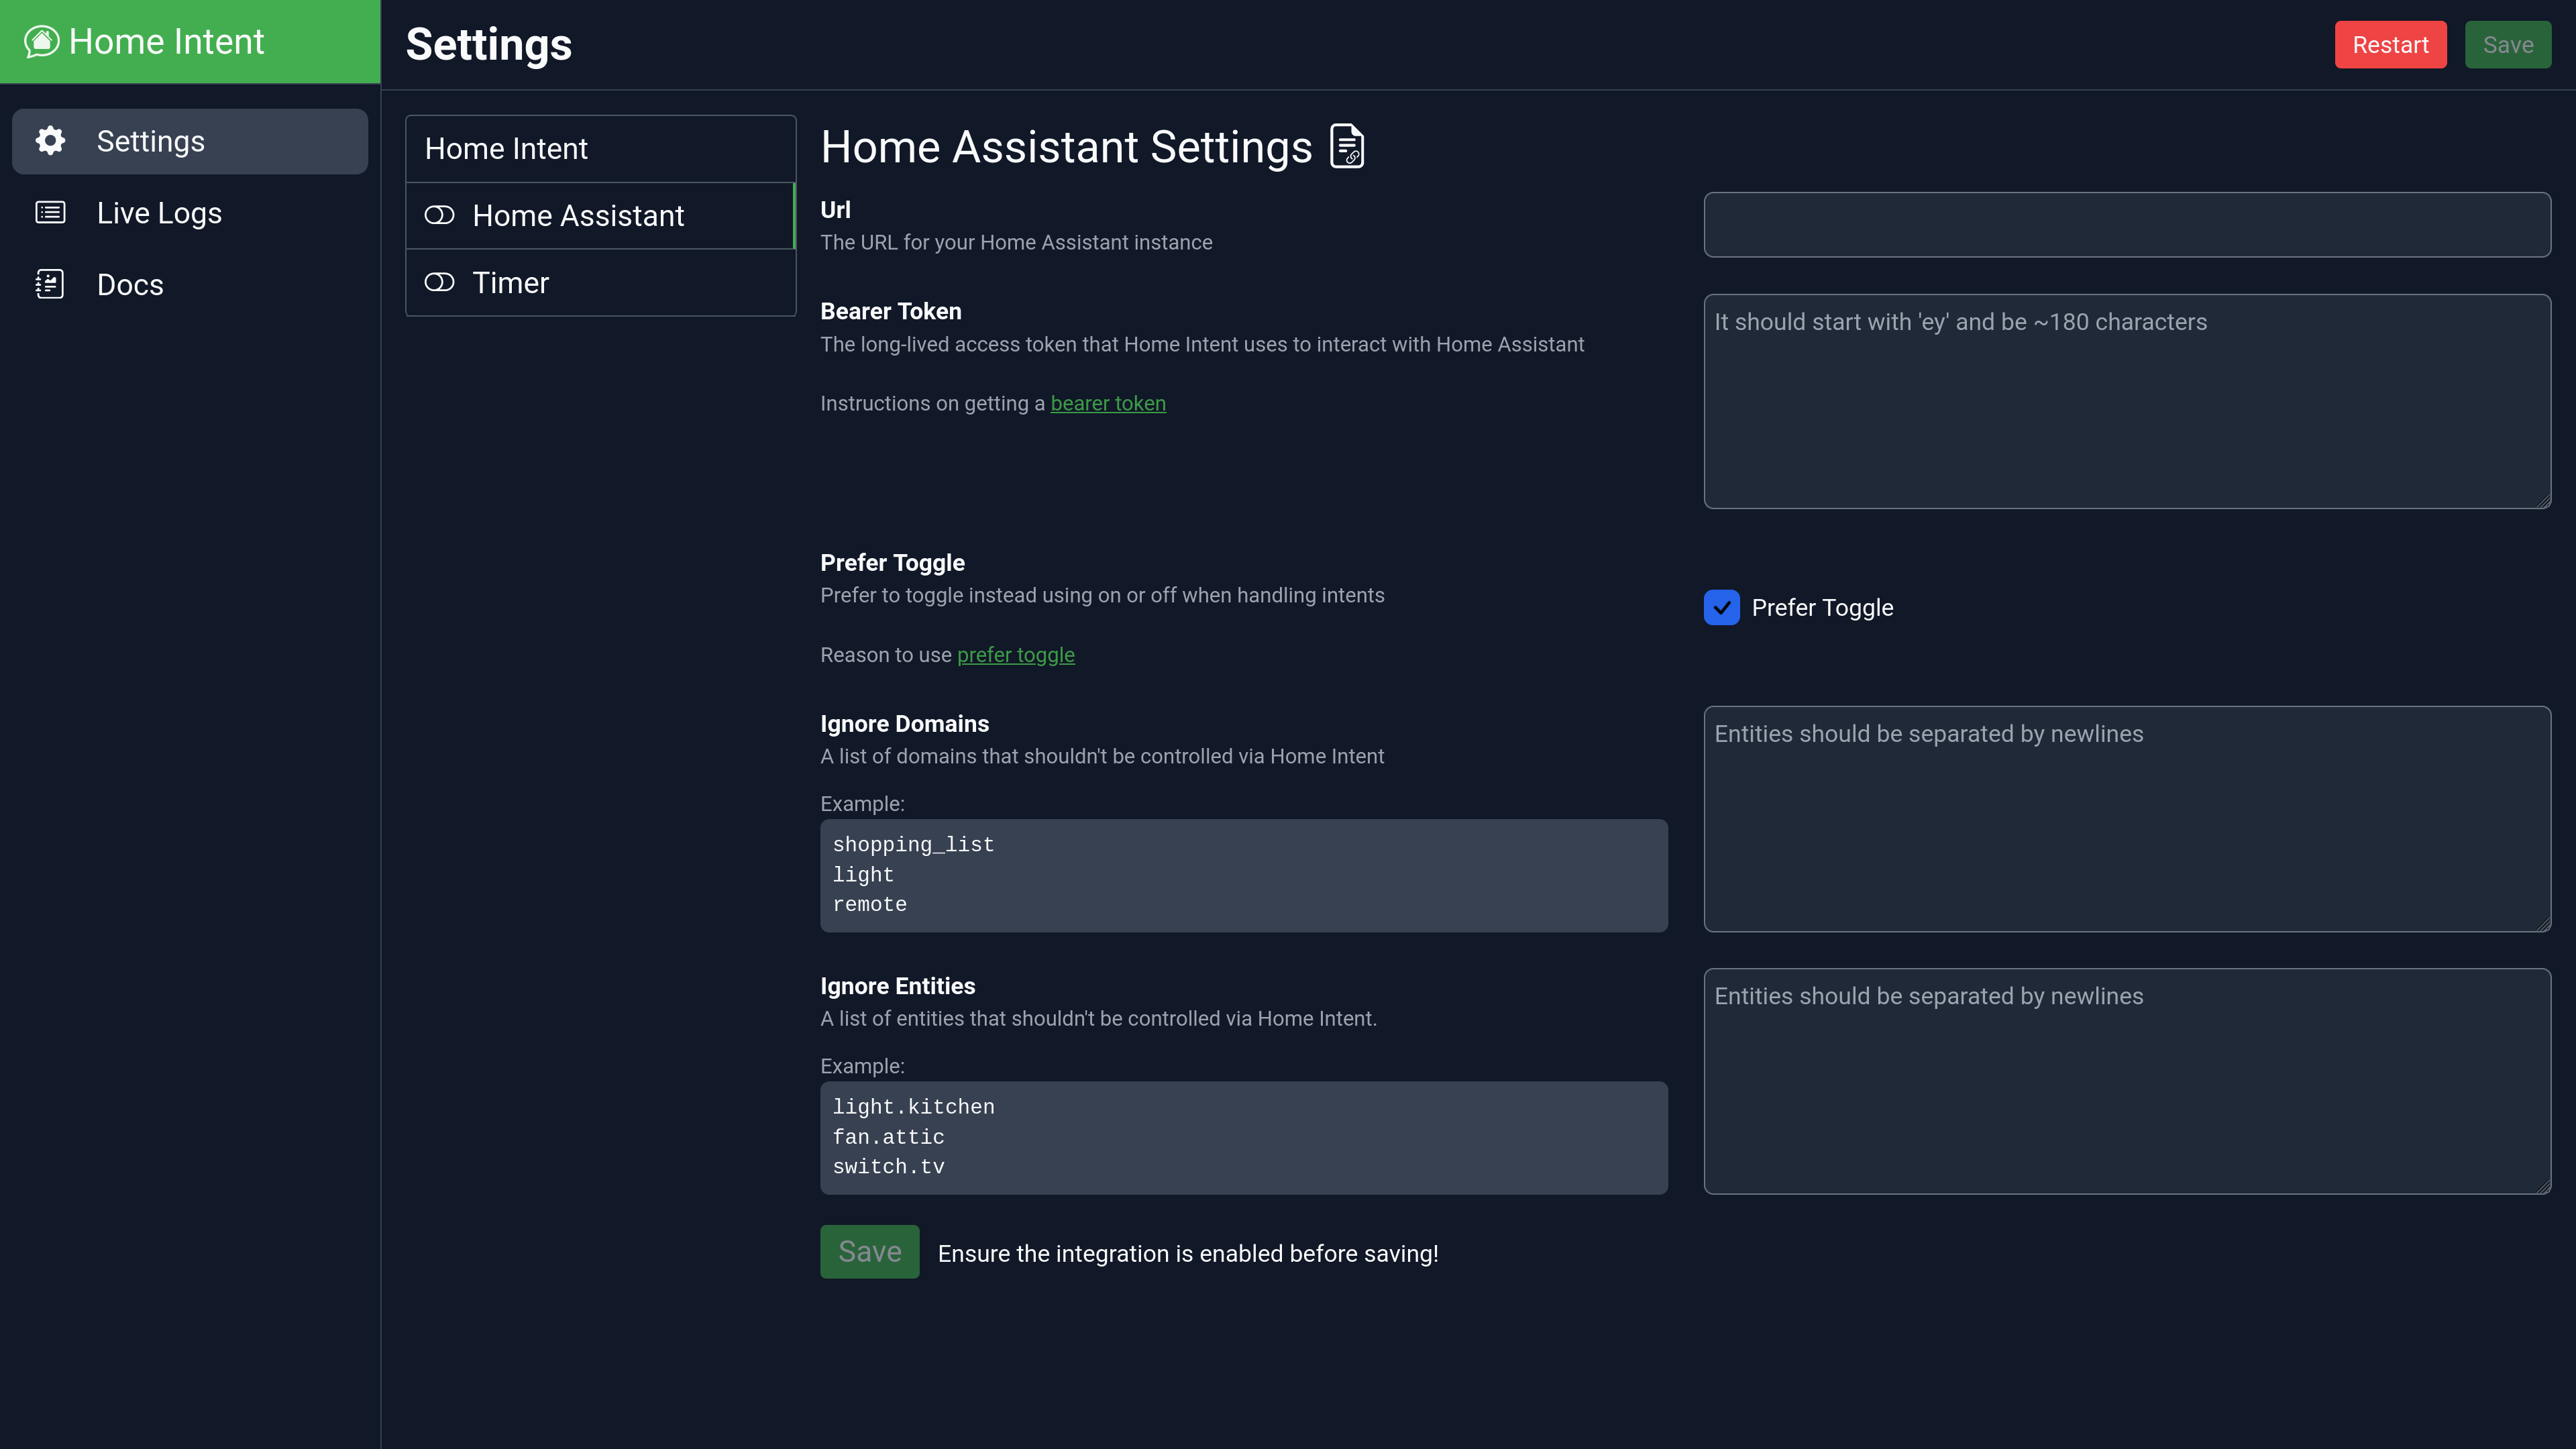 Home Assistant Settings